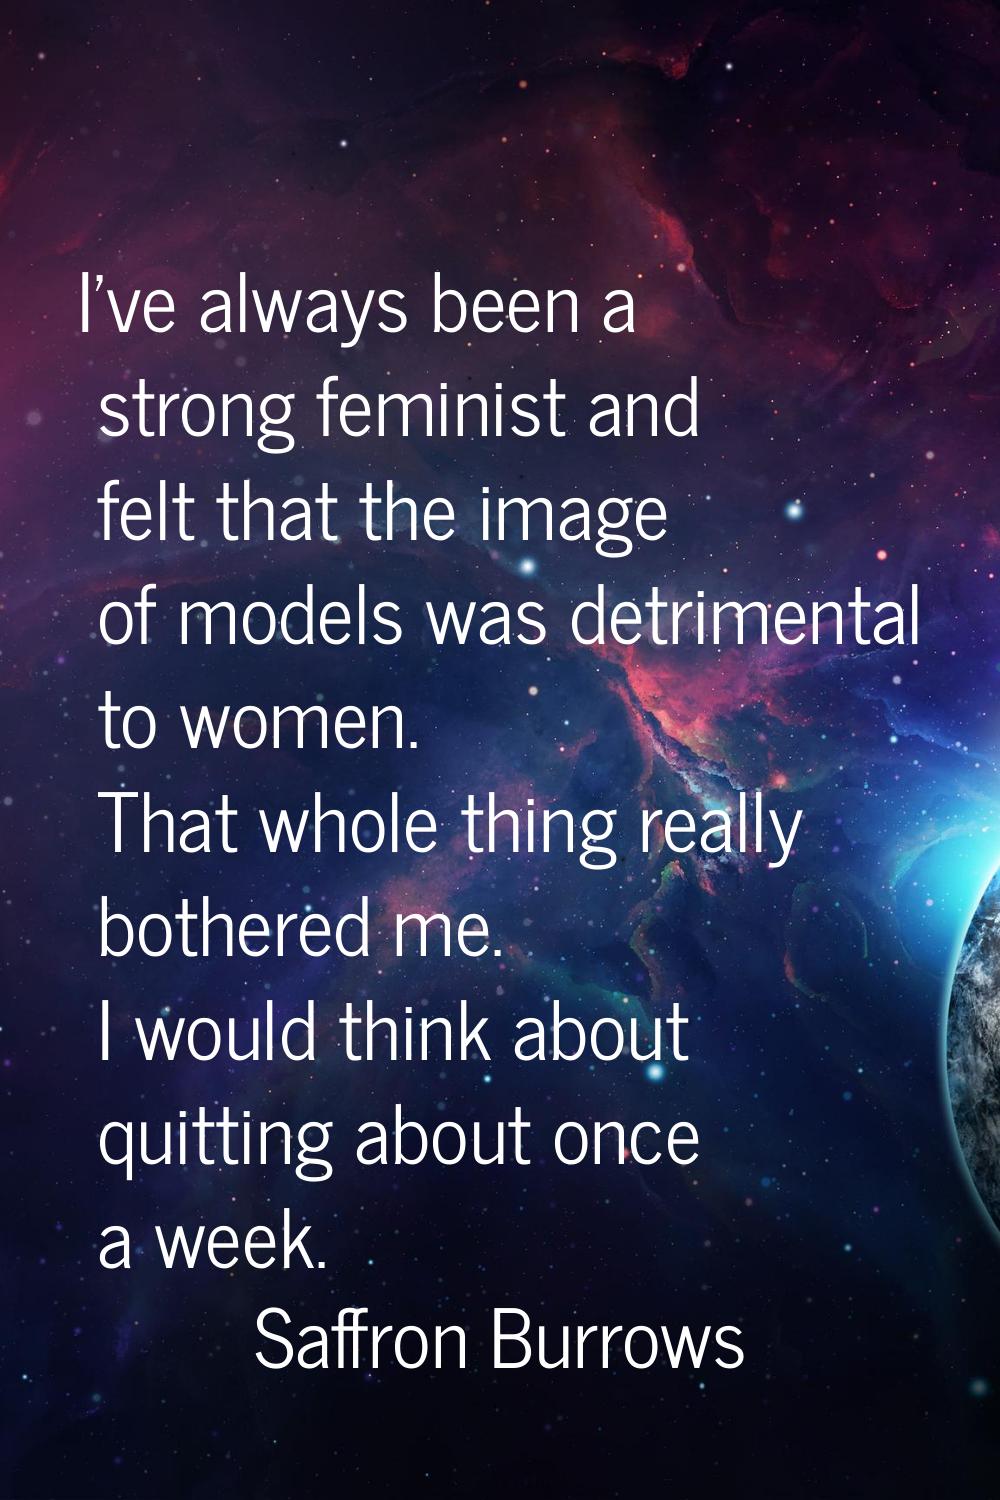 I've always been a strong feminist and felt that the image of models was detrimental to women. That